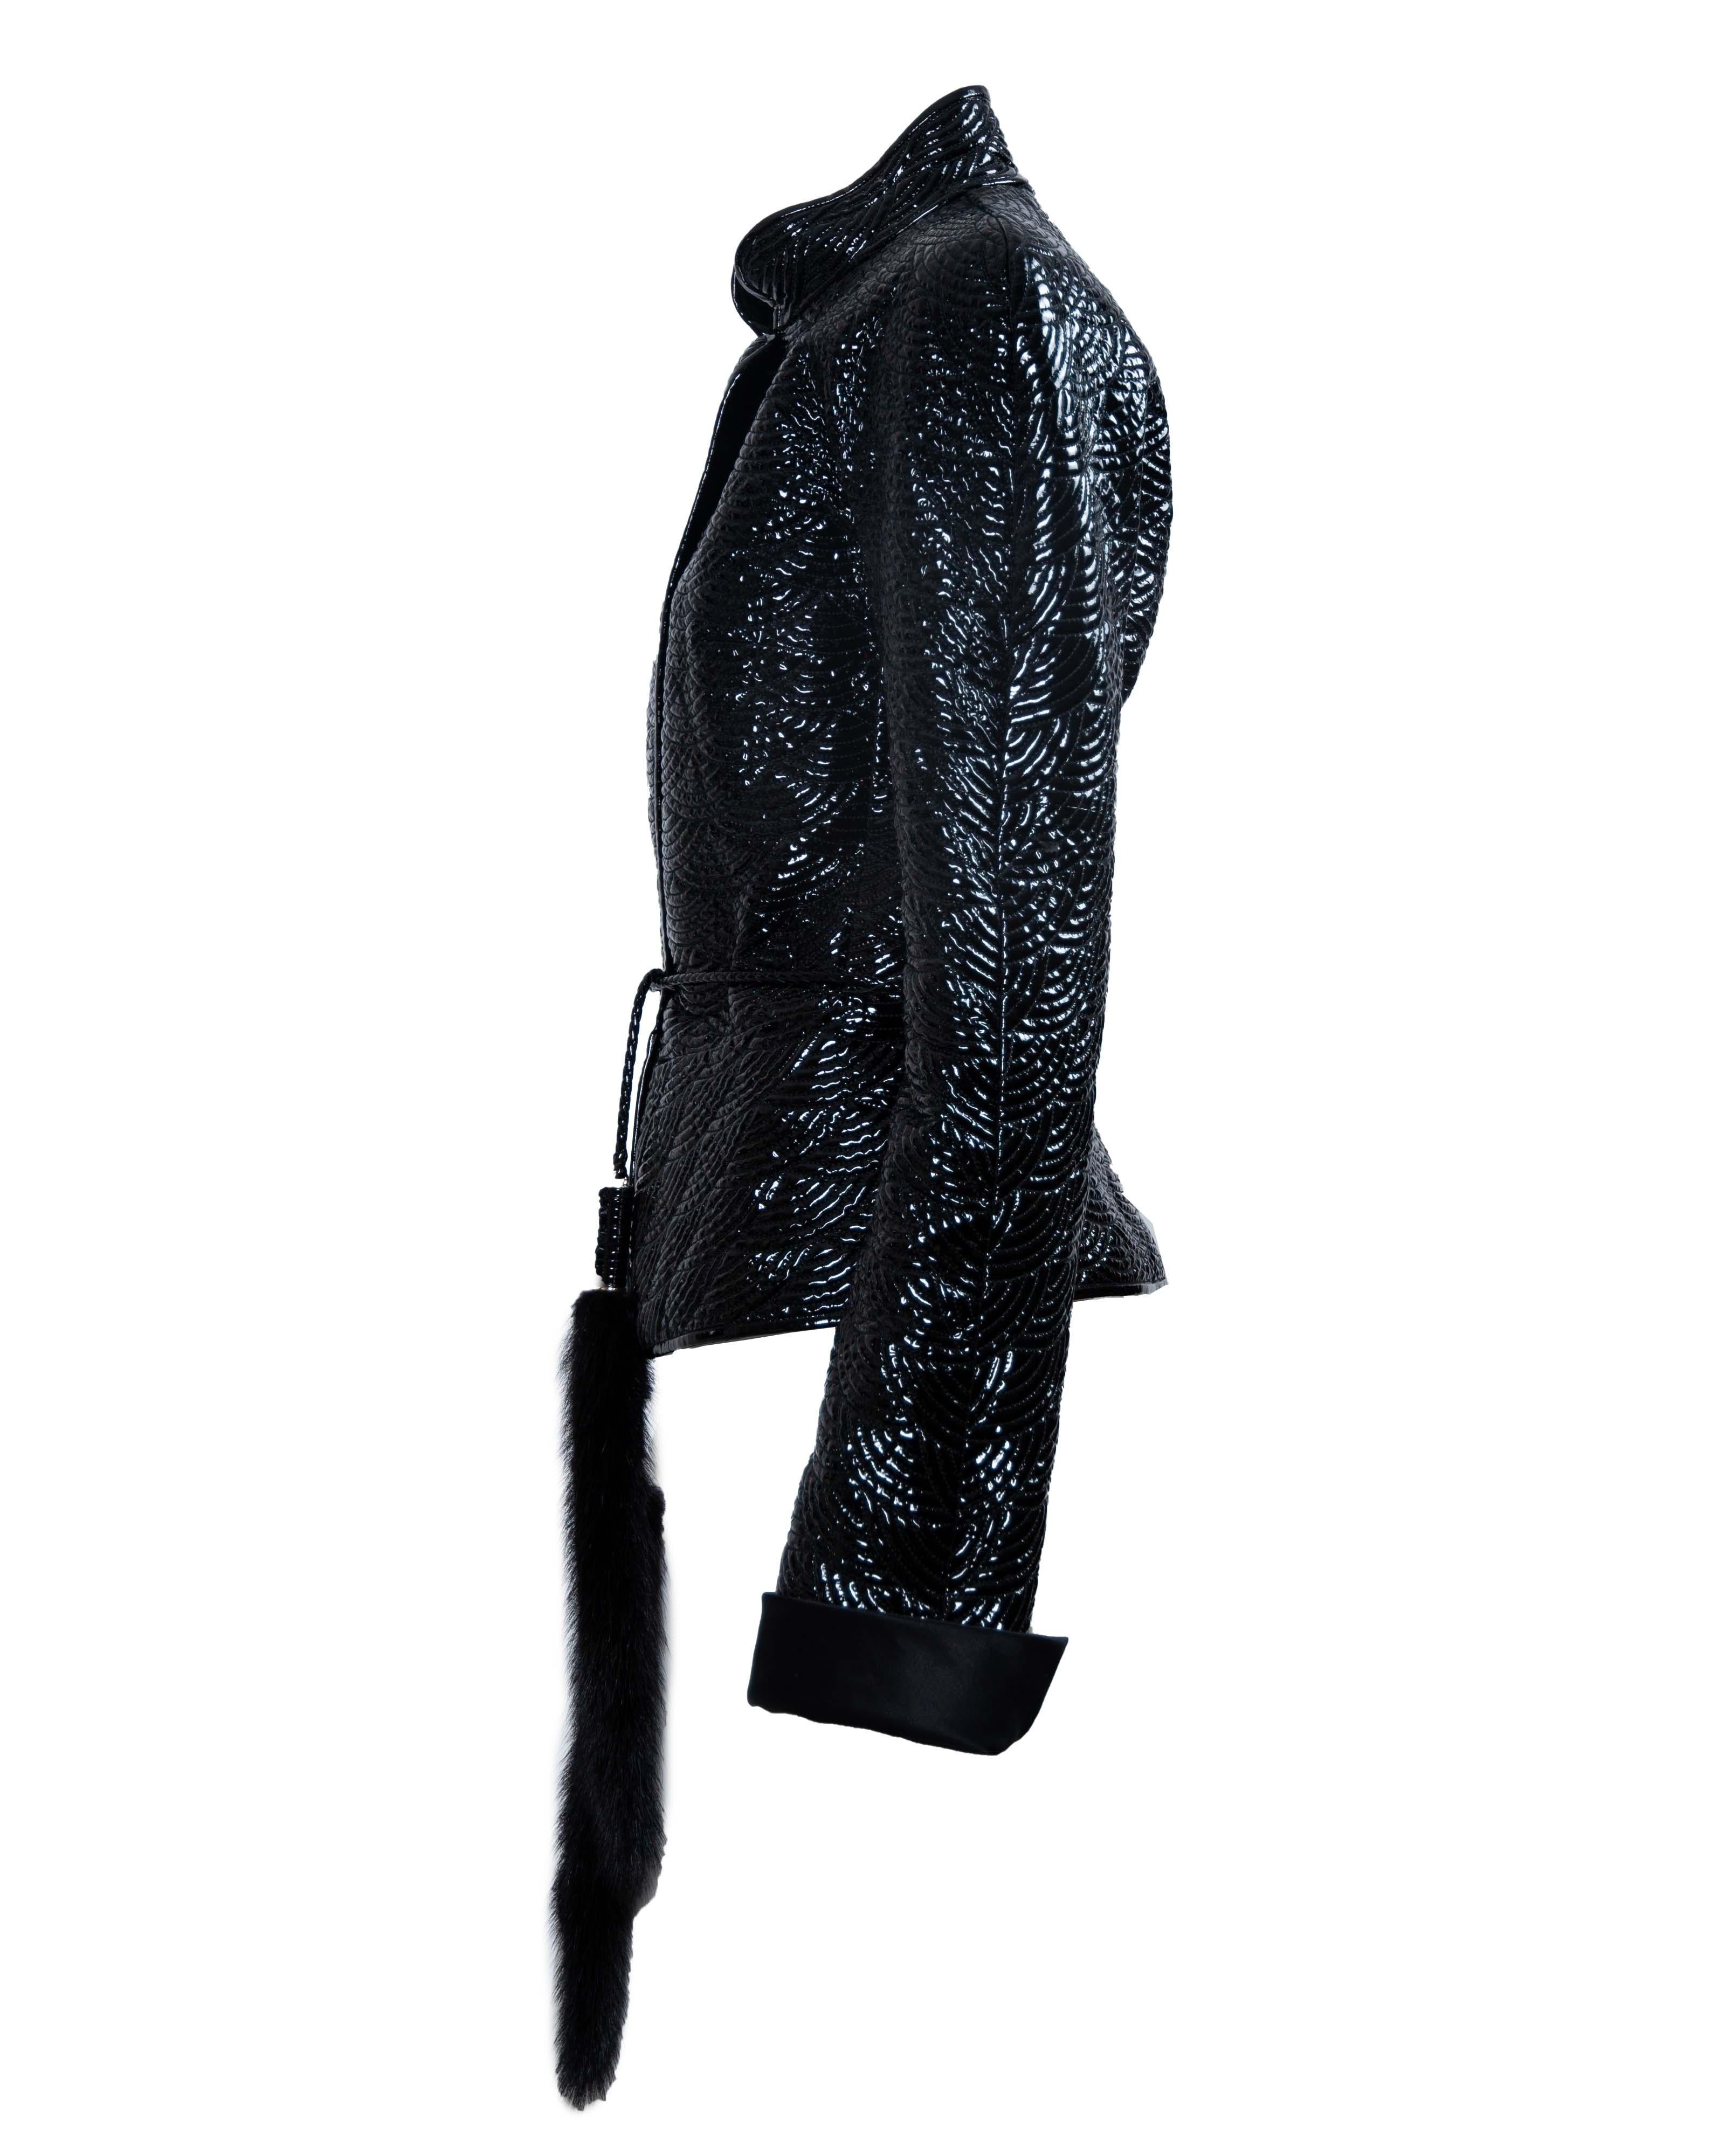 Black F/W 2004 Yves Saint Laurent by Tom Ford Chinoiserie Patent Leather Mink Jacket For Sale